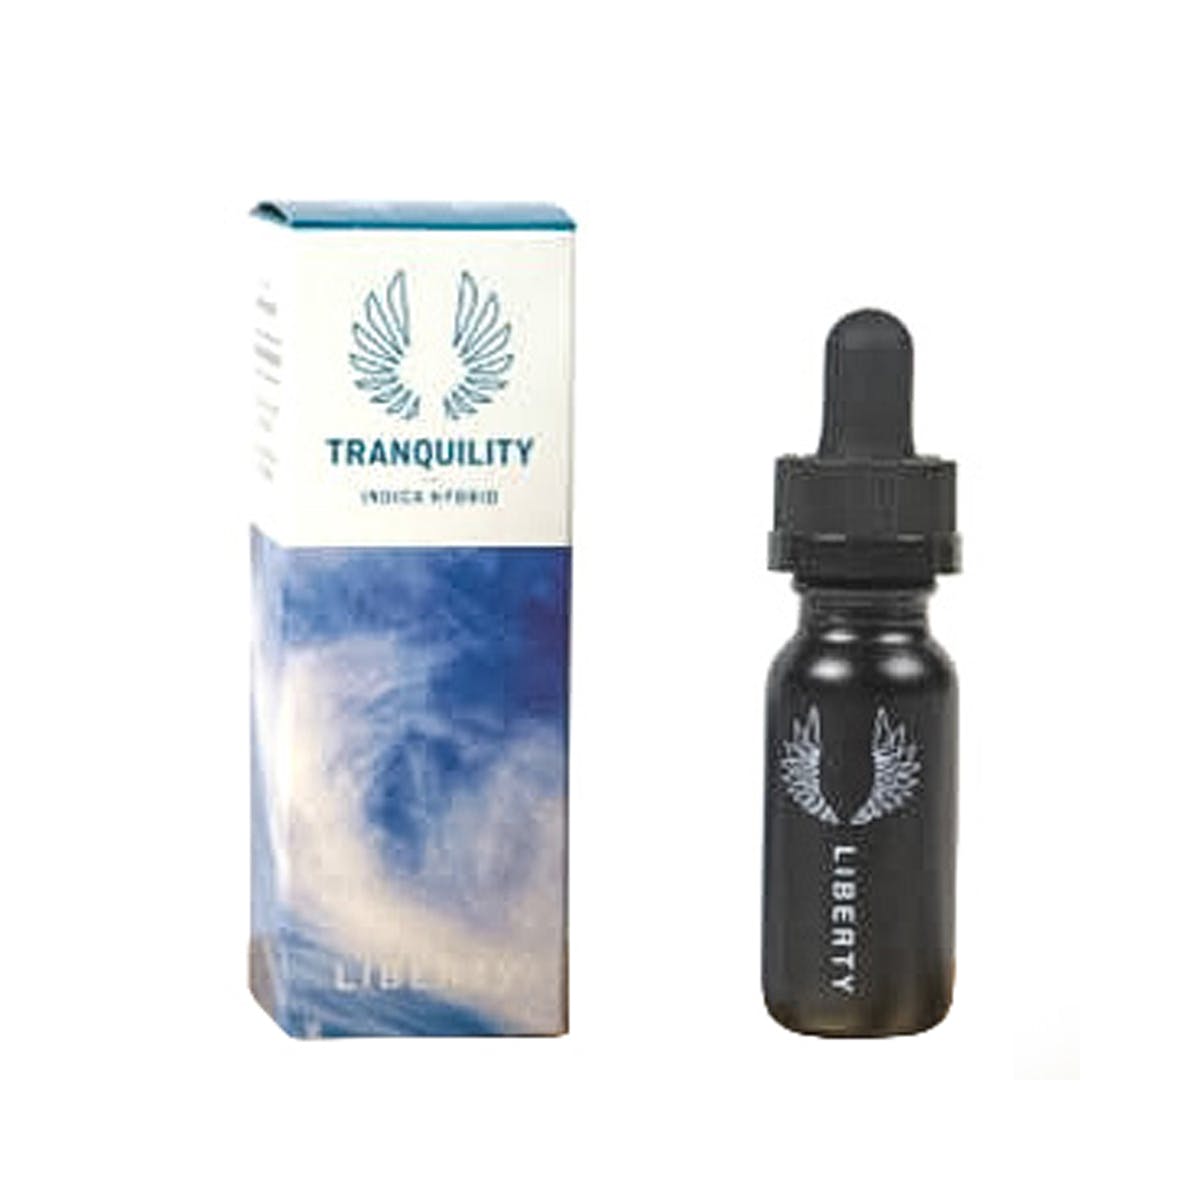 tincture-liberty-tranquility-tincture